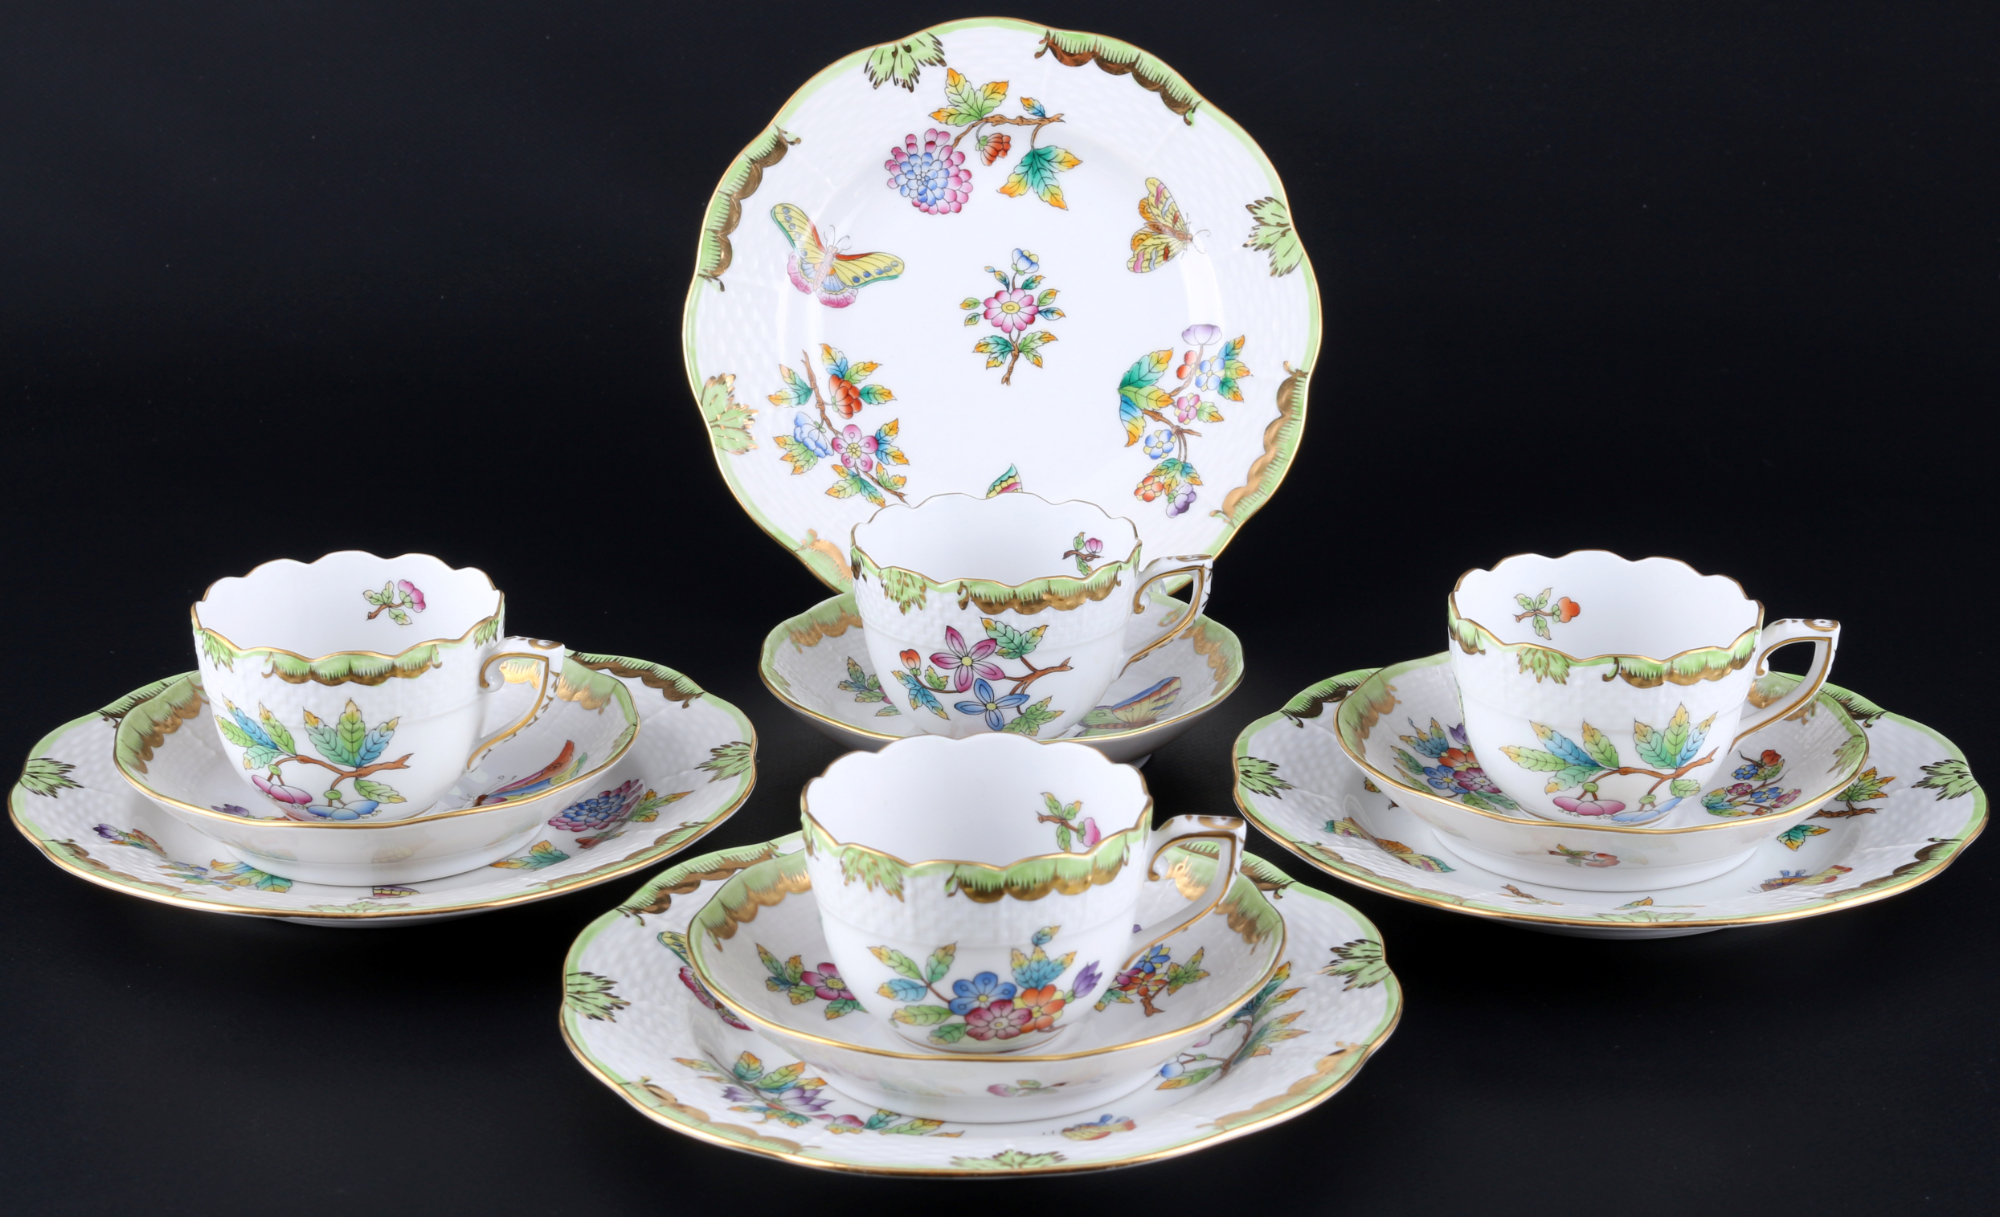 Herend VBO Queen Victoria 4 Mokkagedecke, mocha coffee cups with saucers and dessert plates,